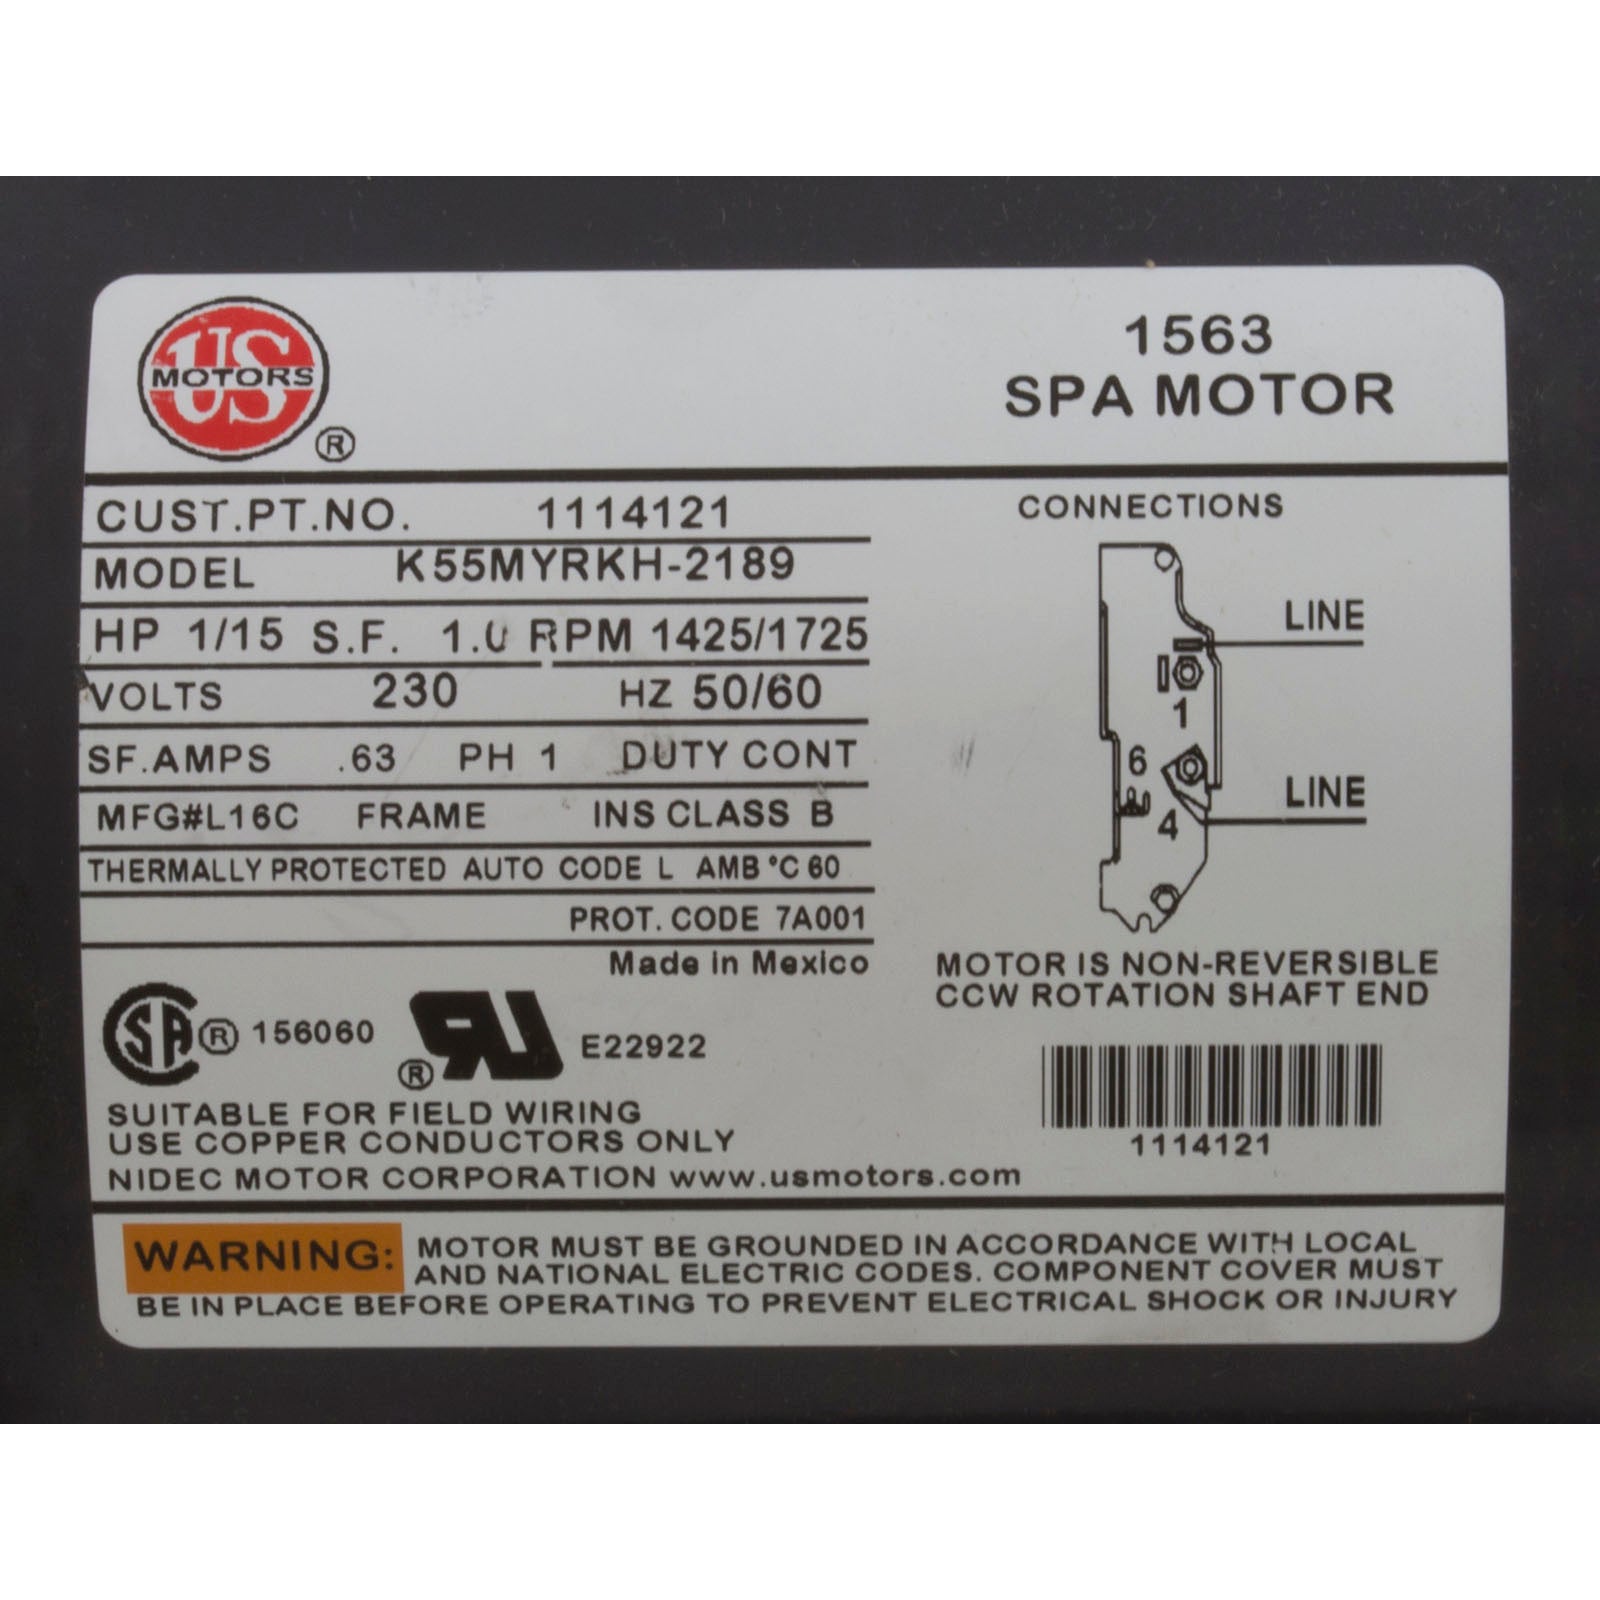 Label of the Old Pump Model 993-0380A-A6-S